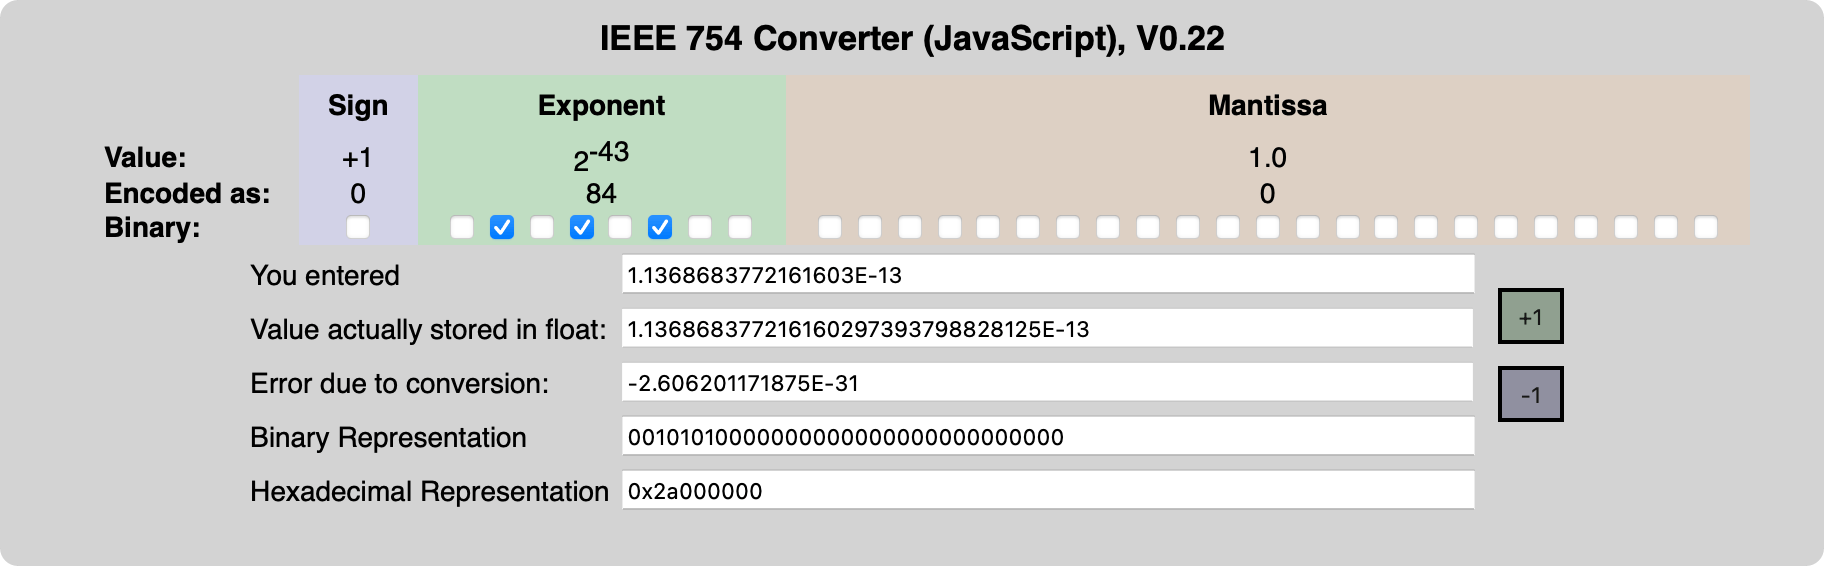 IEEE-754 Floating Point Converter given 1.1368683772161603 times 10 to the power of -13 as input.